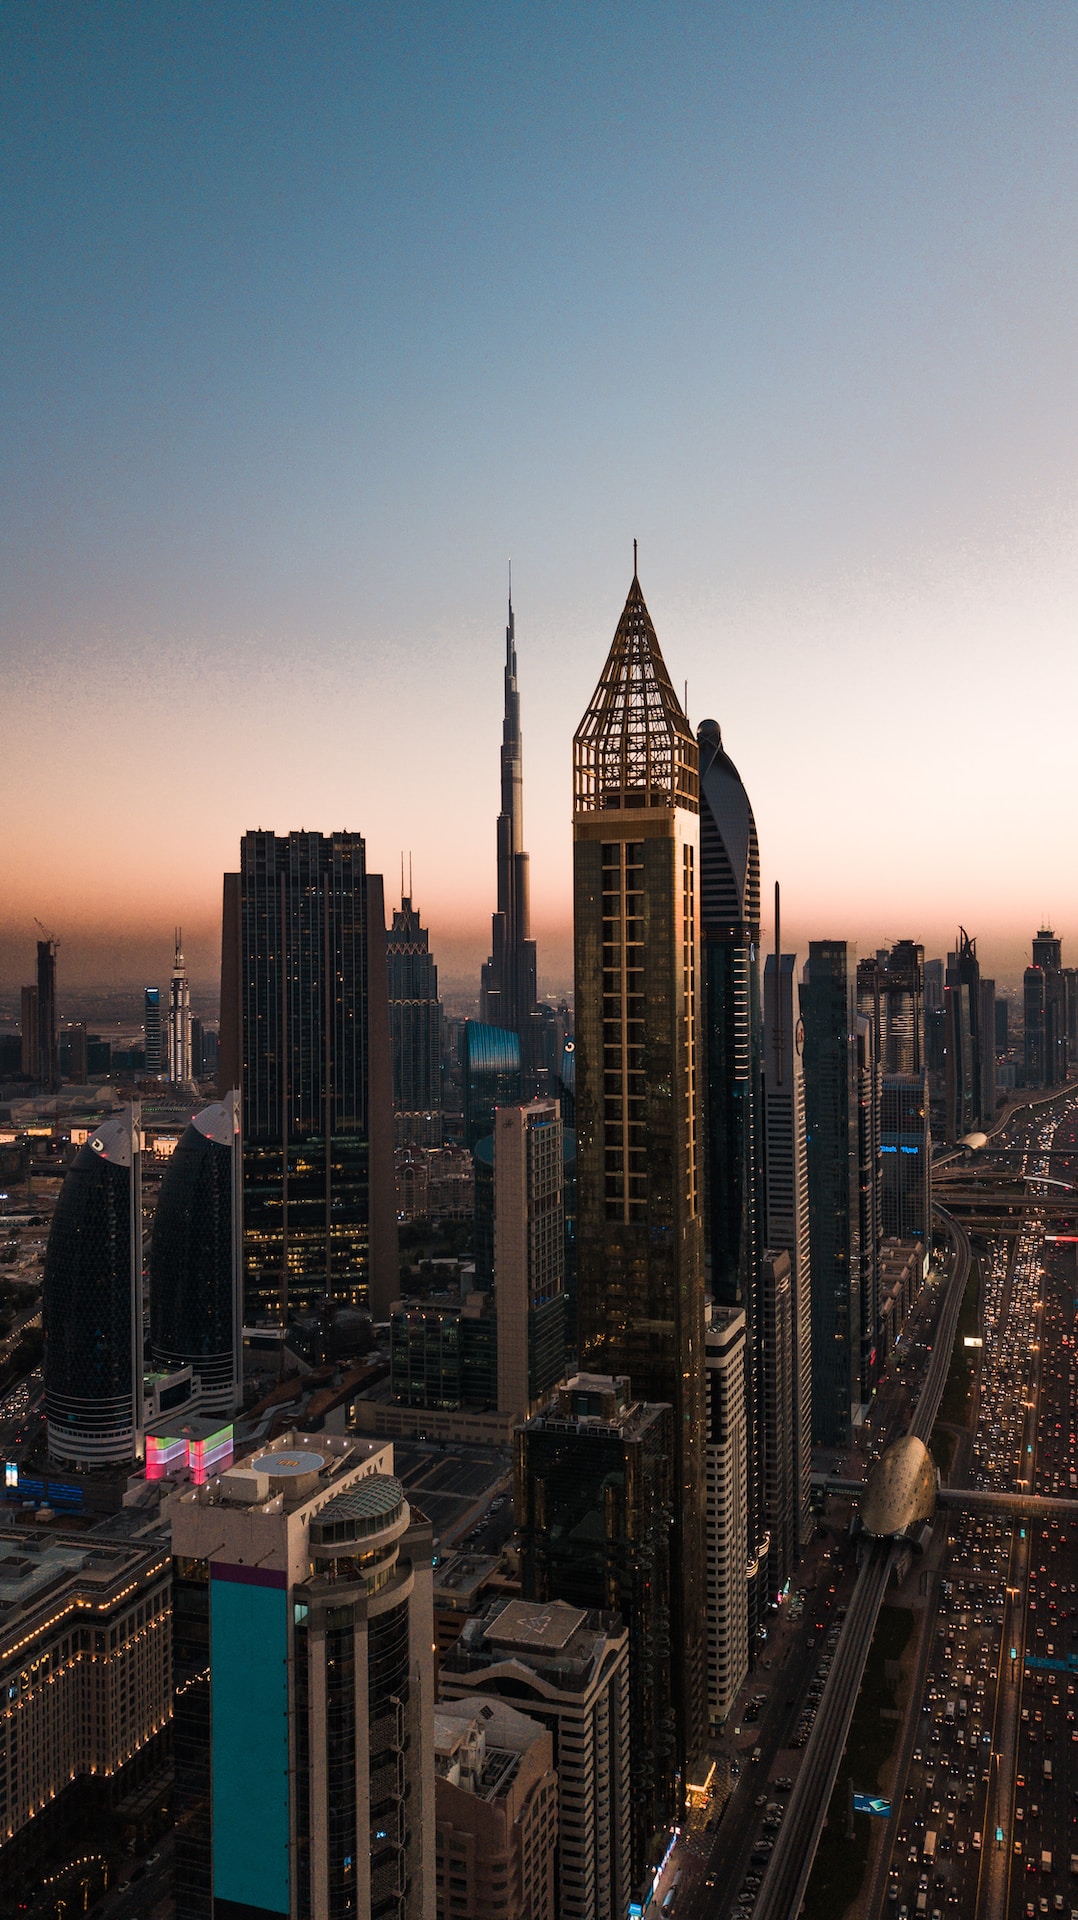 How do I become a licensed real estate agent in Dubai?